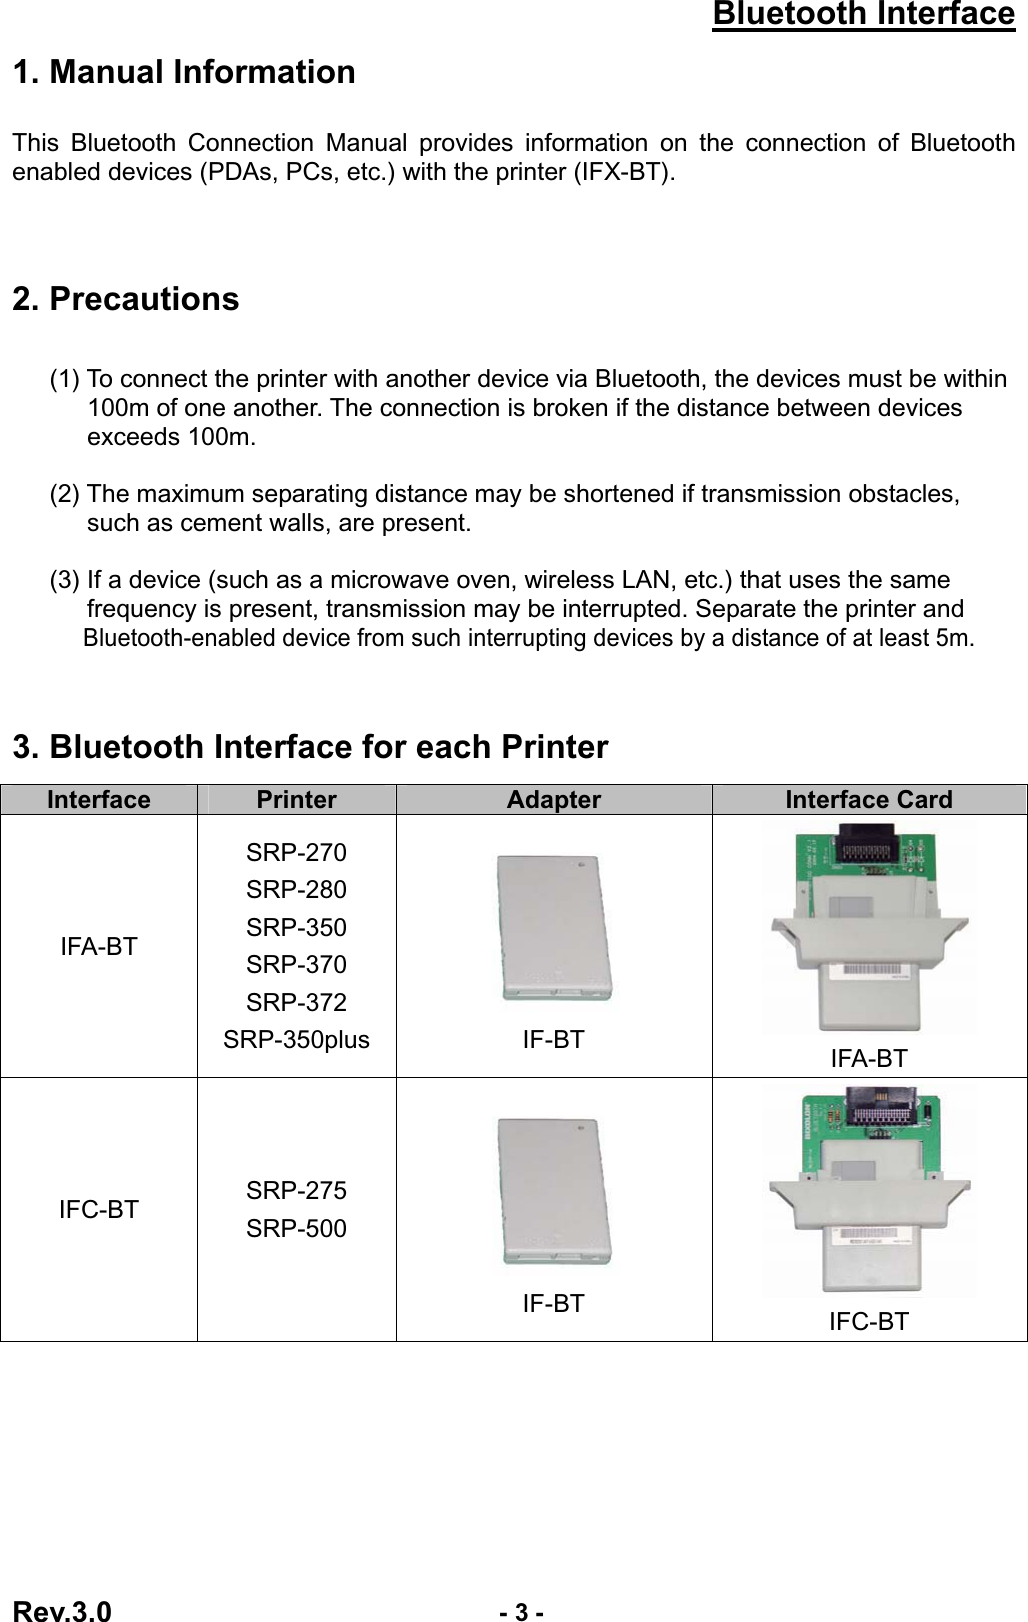 Bluetooth InterfaceRev.3.0  - 3 -1. Manual Information This Bluetooth Connection Manual provides information on the connection of Bluetooth enabled devices (PDAs, PCs, etc.) with the printer (IFX-BT). 2. Precautions       (1) To connect the printer with another device via Bluetooth, the devices must be within 100m of one another. The connection is broken if the distance between devices exceeds 100m.       (2) The maximum separating distance may be shortened if transmission obstacles, such as cement walls, are present.       (3) If a device (such as a microwave oven, wireless LAN, etc.) that uses the same   frequency is present, transmission may be interrupted. Separate the printer and   Bluetooth-enabled device from such interrupting devices by a distance of at least 5m.3. Bluetooth Interface for each Printer Interface Printer Adapter Interface Card IFA-BT SRP-270SRP-280SRP-350SRP-370SRP-372SRP-350plus IF-BT IFA-BT IFC-BT SRP-275SRP-500IF-BT IFC-BT